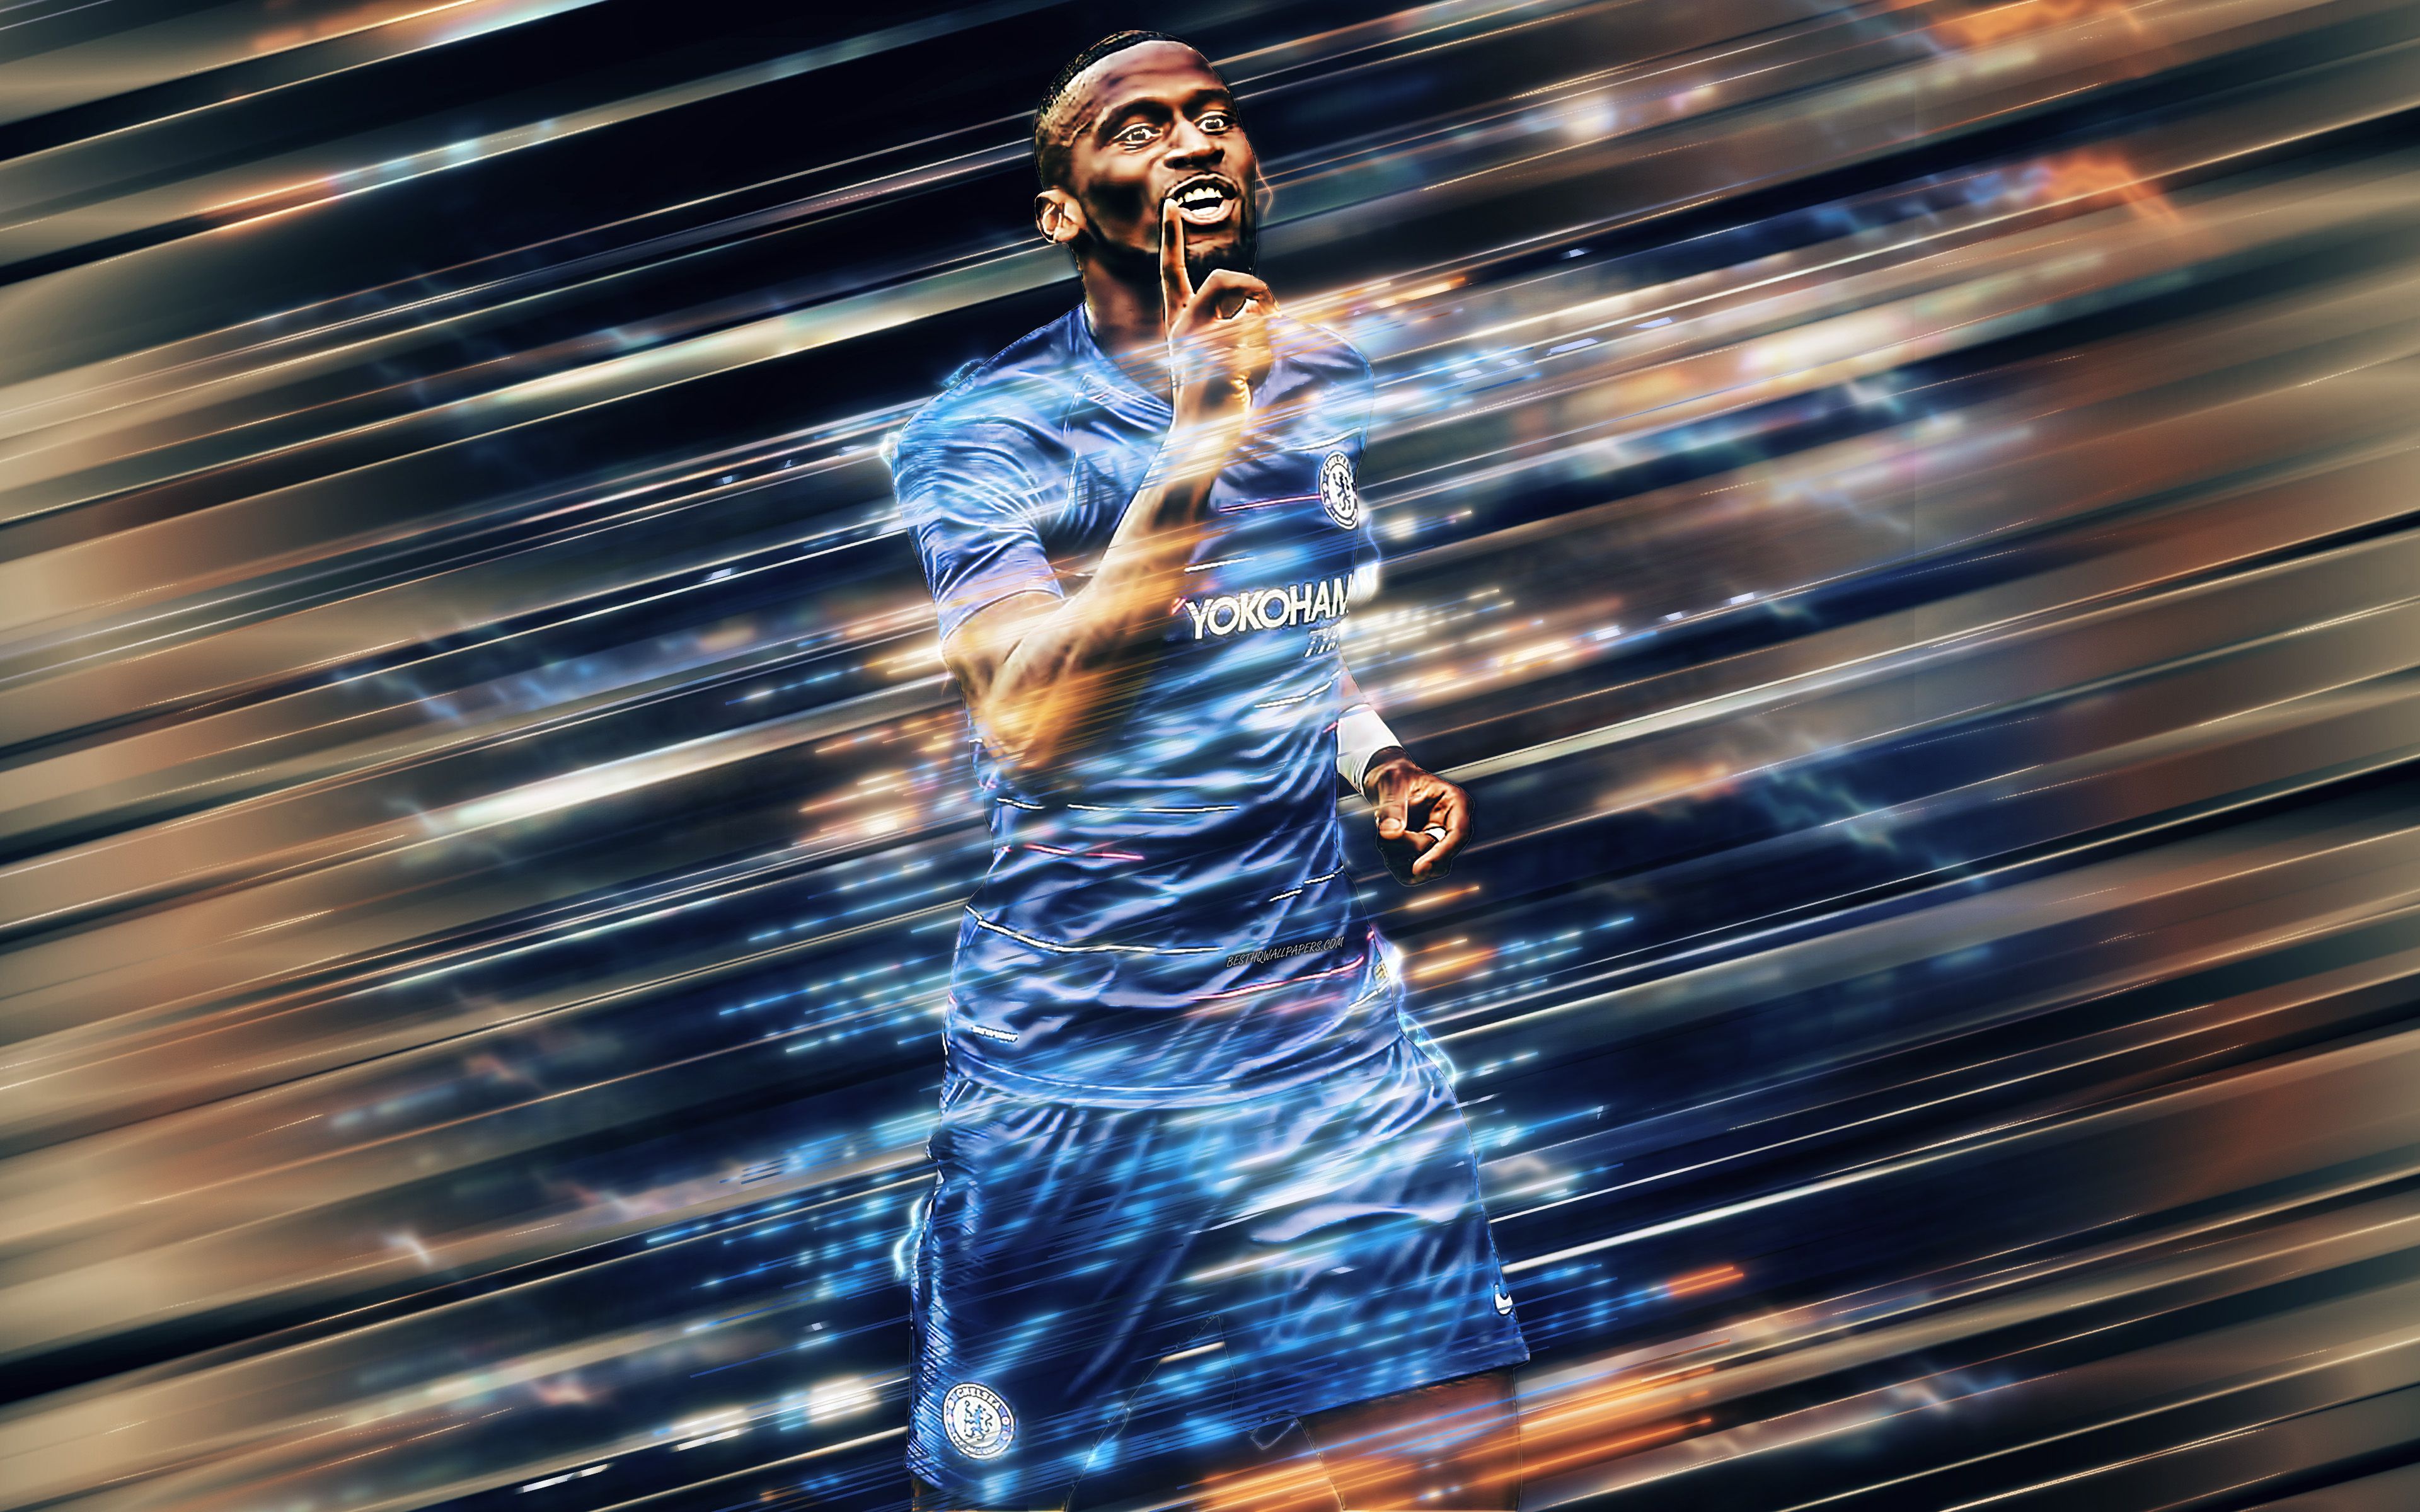 Download wallpaper Antonio Rudiger, 4k, creative art, blades style, Chelsea FC, German footballer, Premier League, England, blue creative background, football for desktop with resolution 3840x2400. High Quality HD picture wallpaper